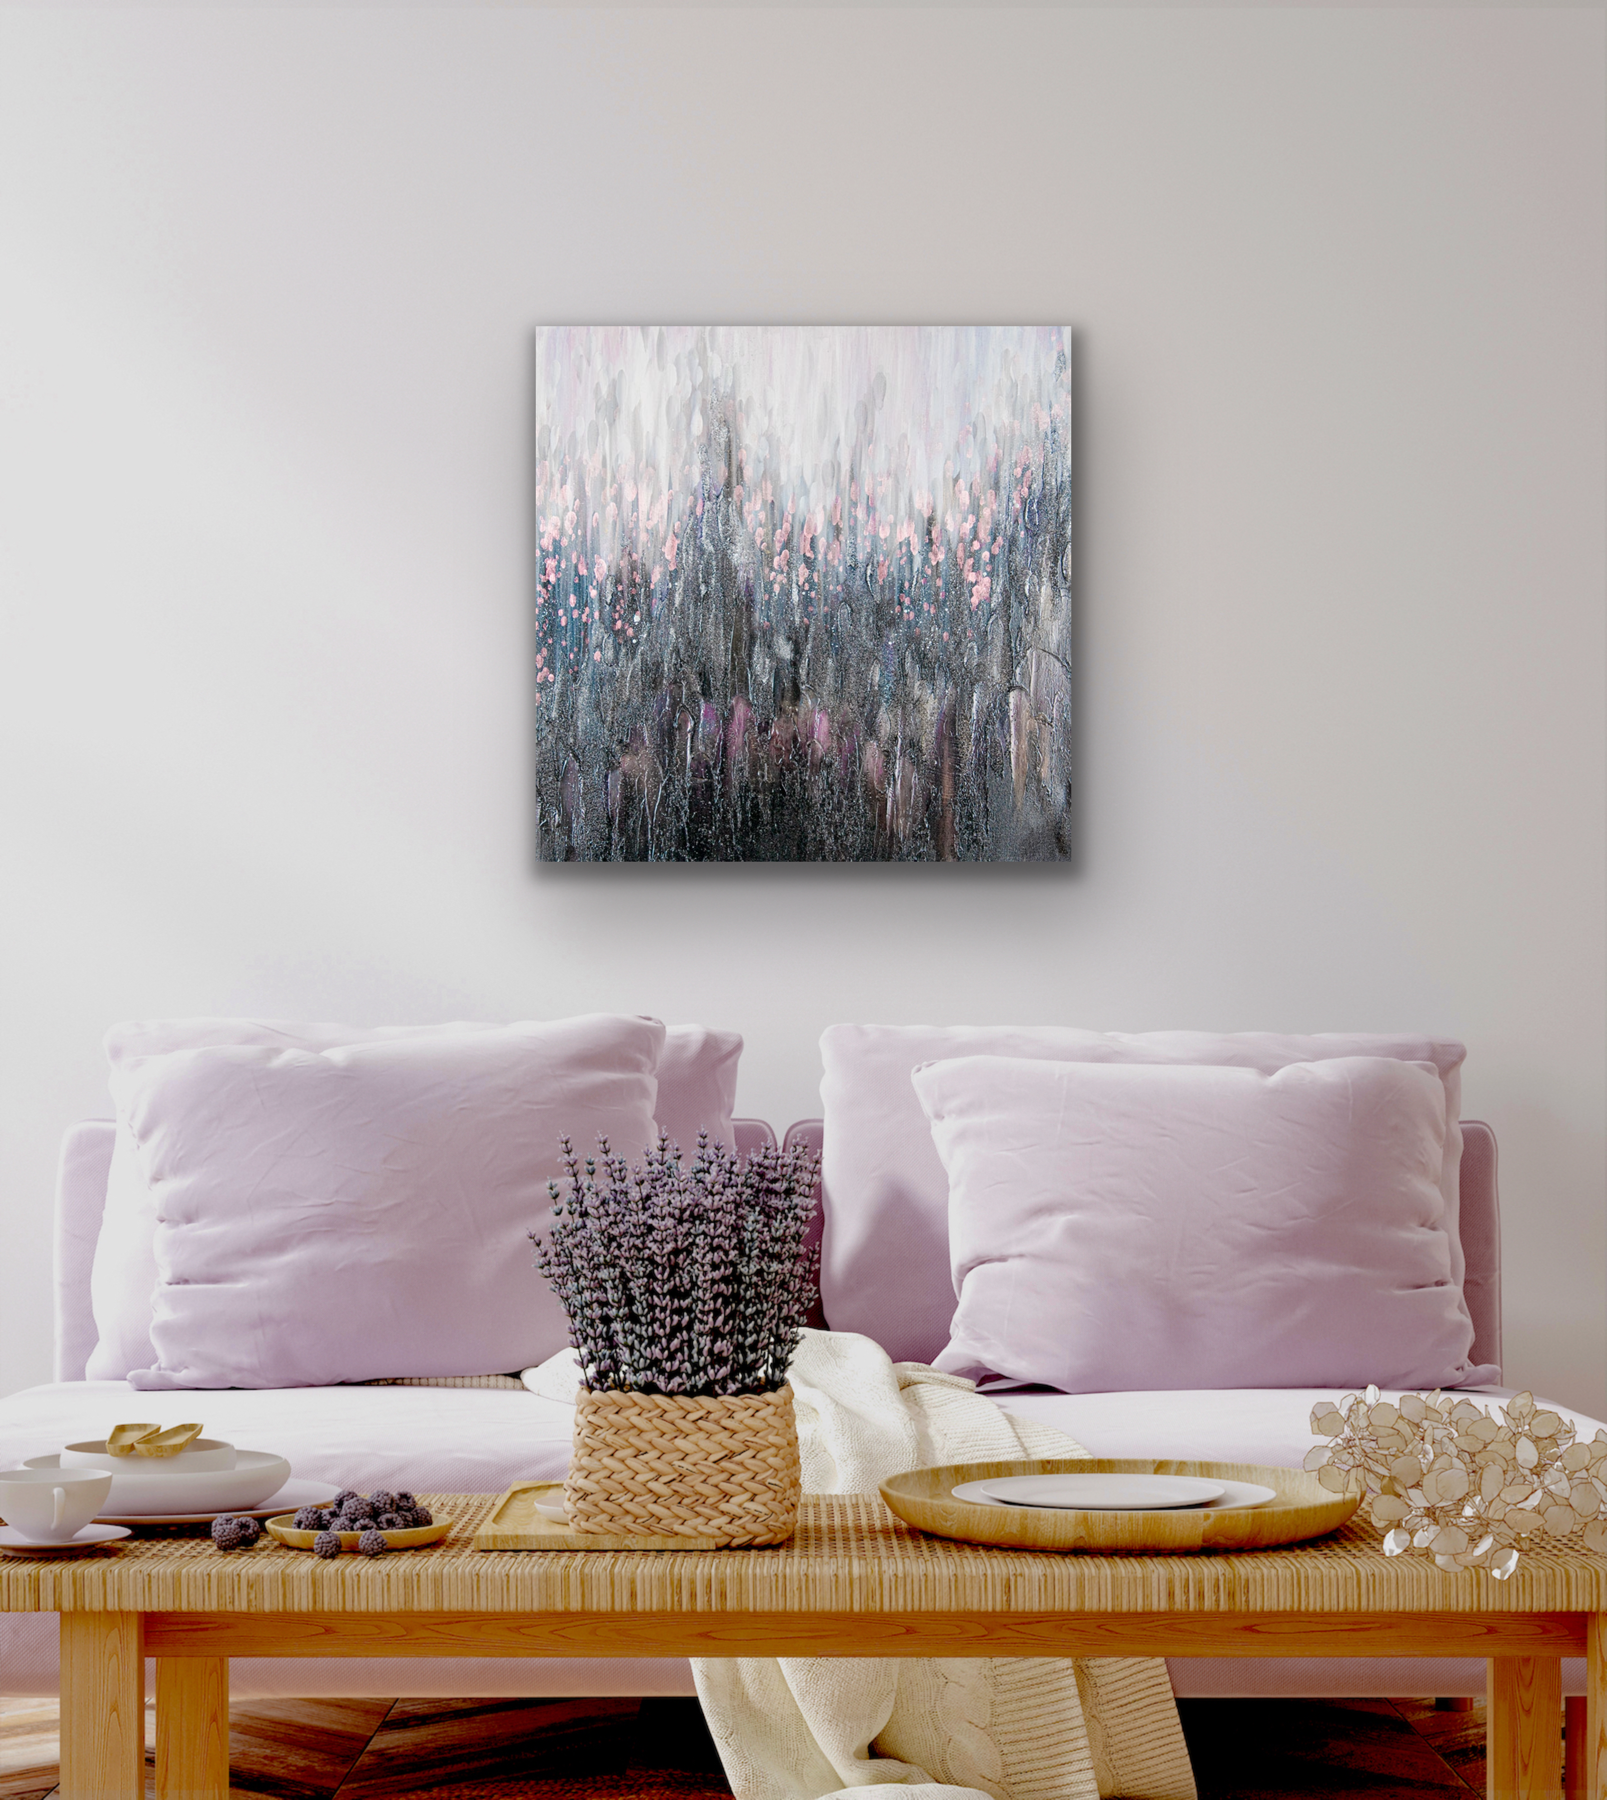 This work of art will look great in your living room, dining room or bedroom.